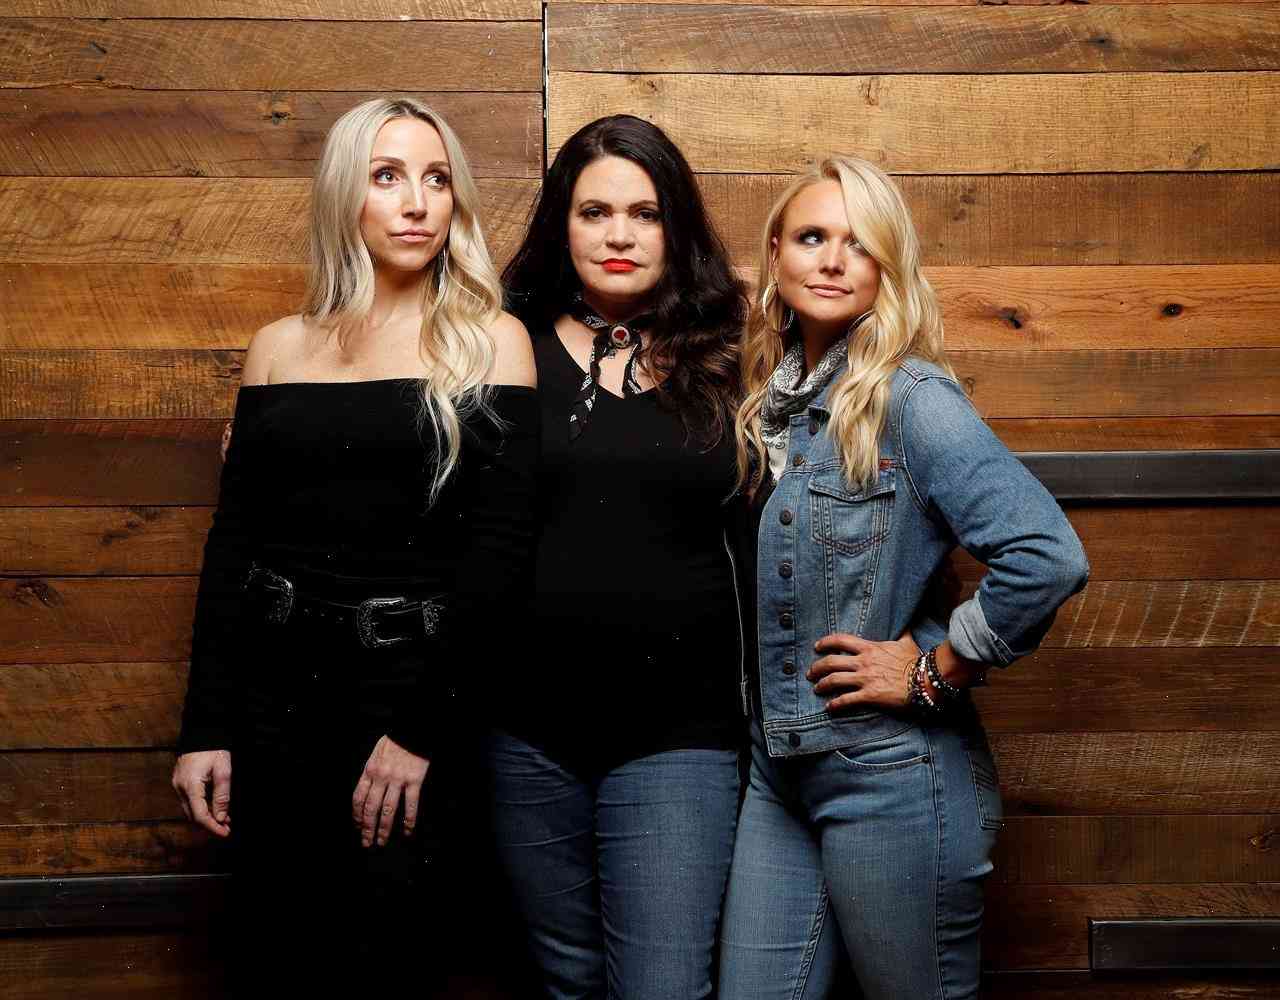 Pistol Annies album 'The Christmas Project' comes with an explanation